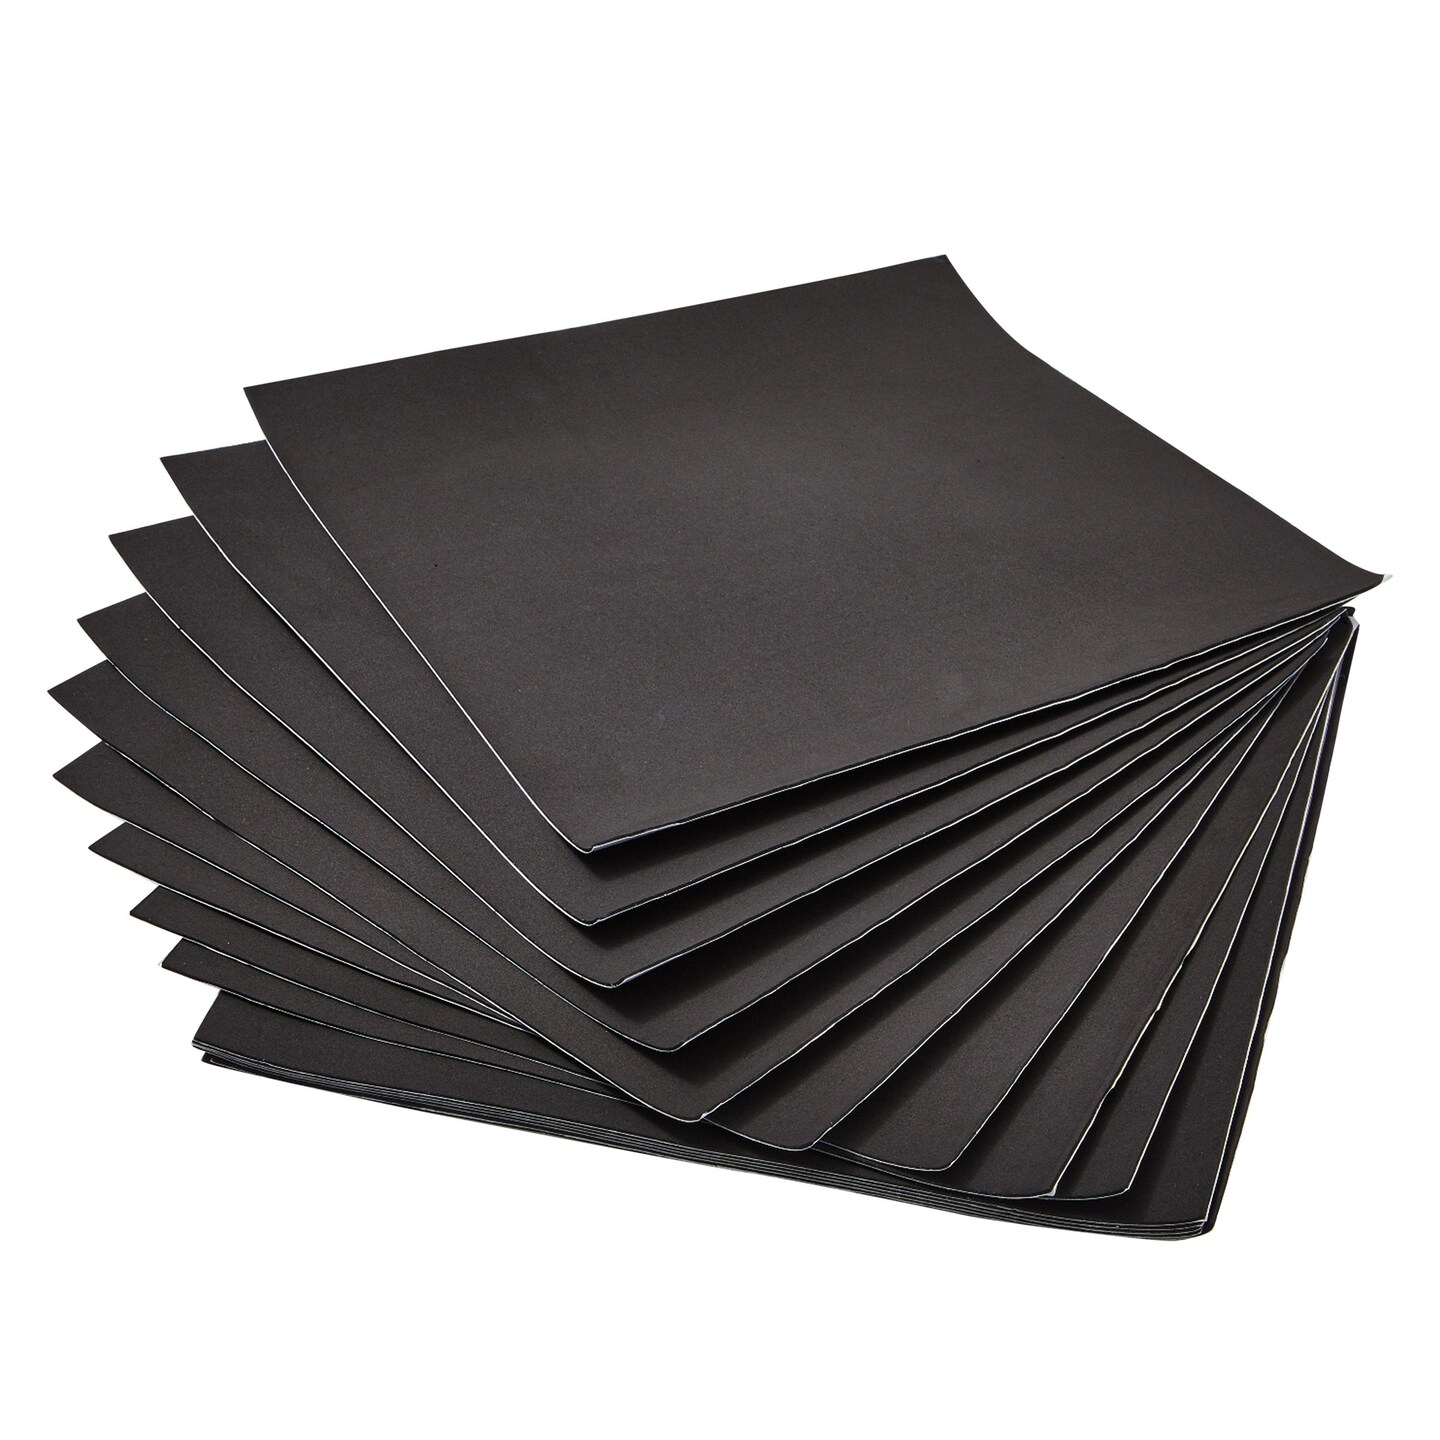 15 Pack Adhesive 1/16 Thick Neoprene Rubber Sheets, 12x12